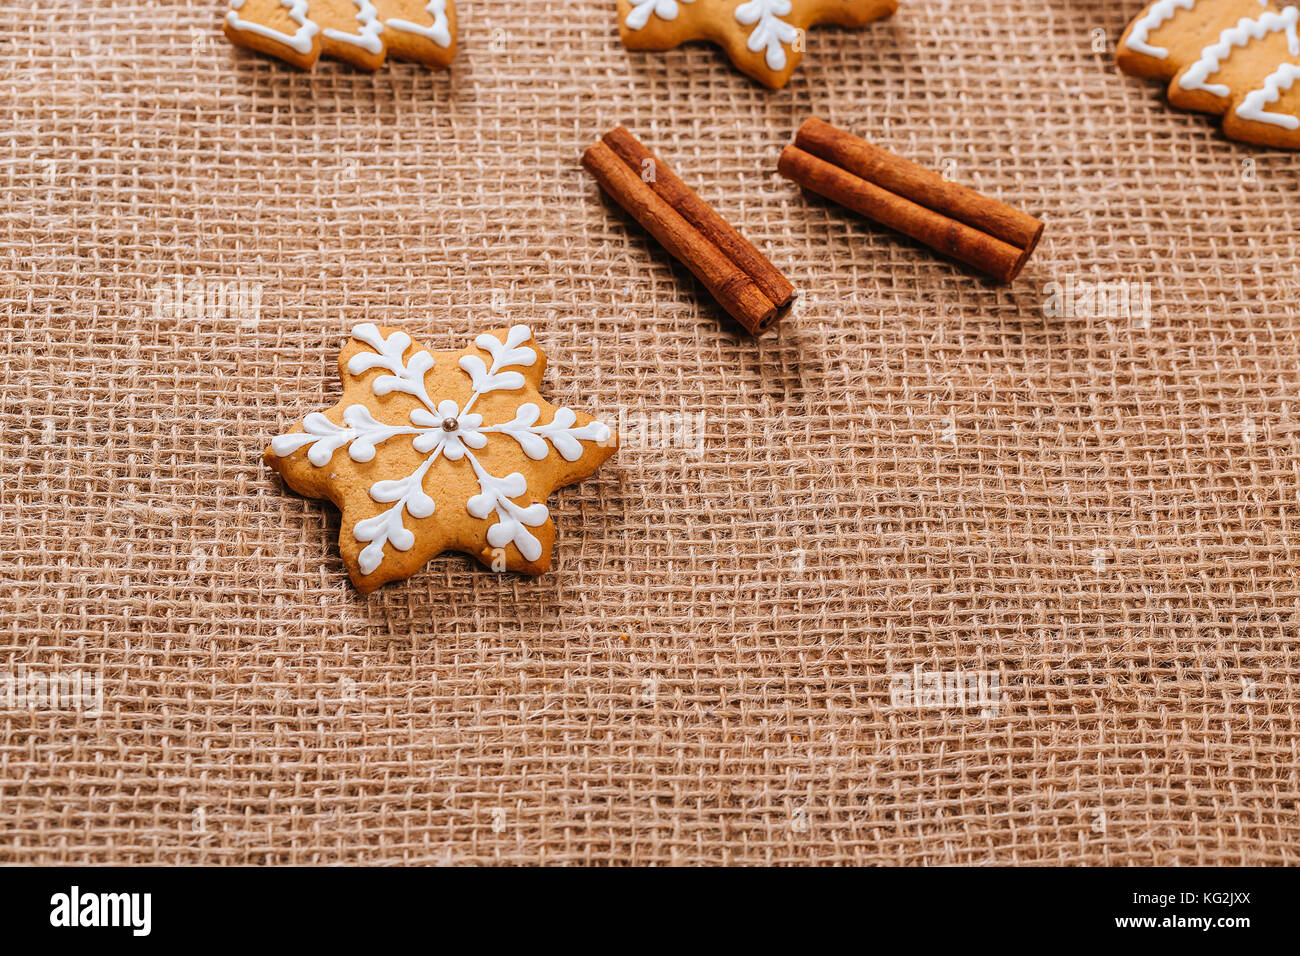 Christmas gingerbread cookies homemade and New Year decor on table with burlap tablecloth. Merry Christmas postcard. Stock Photo